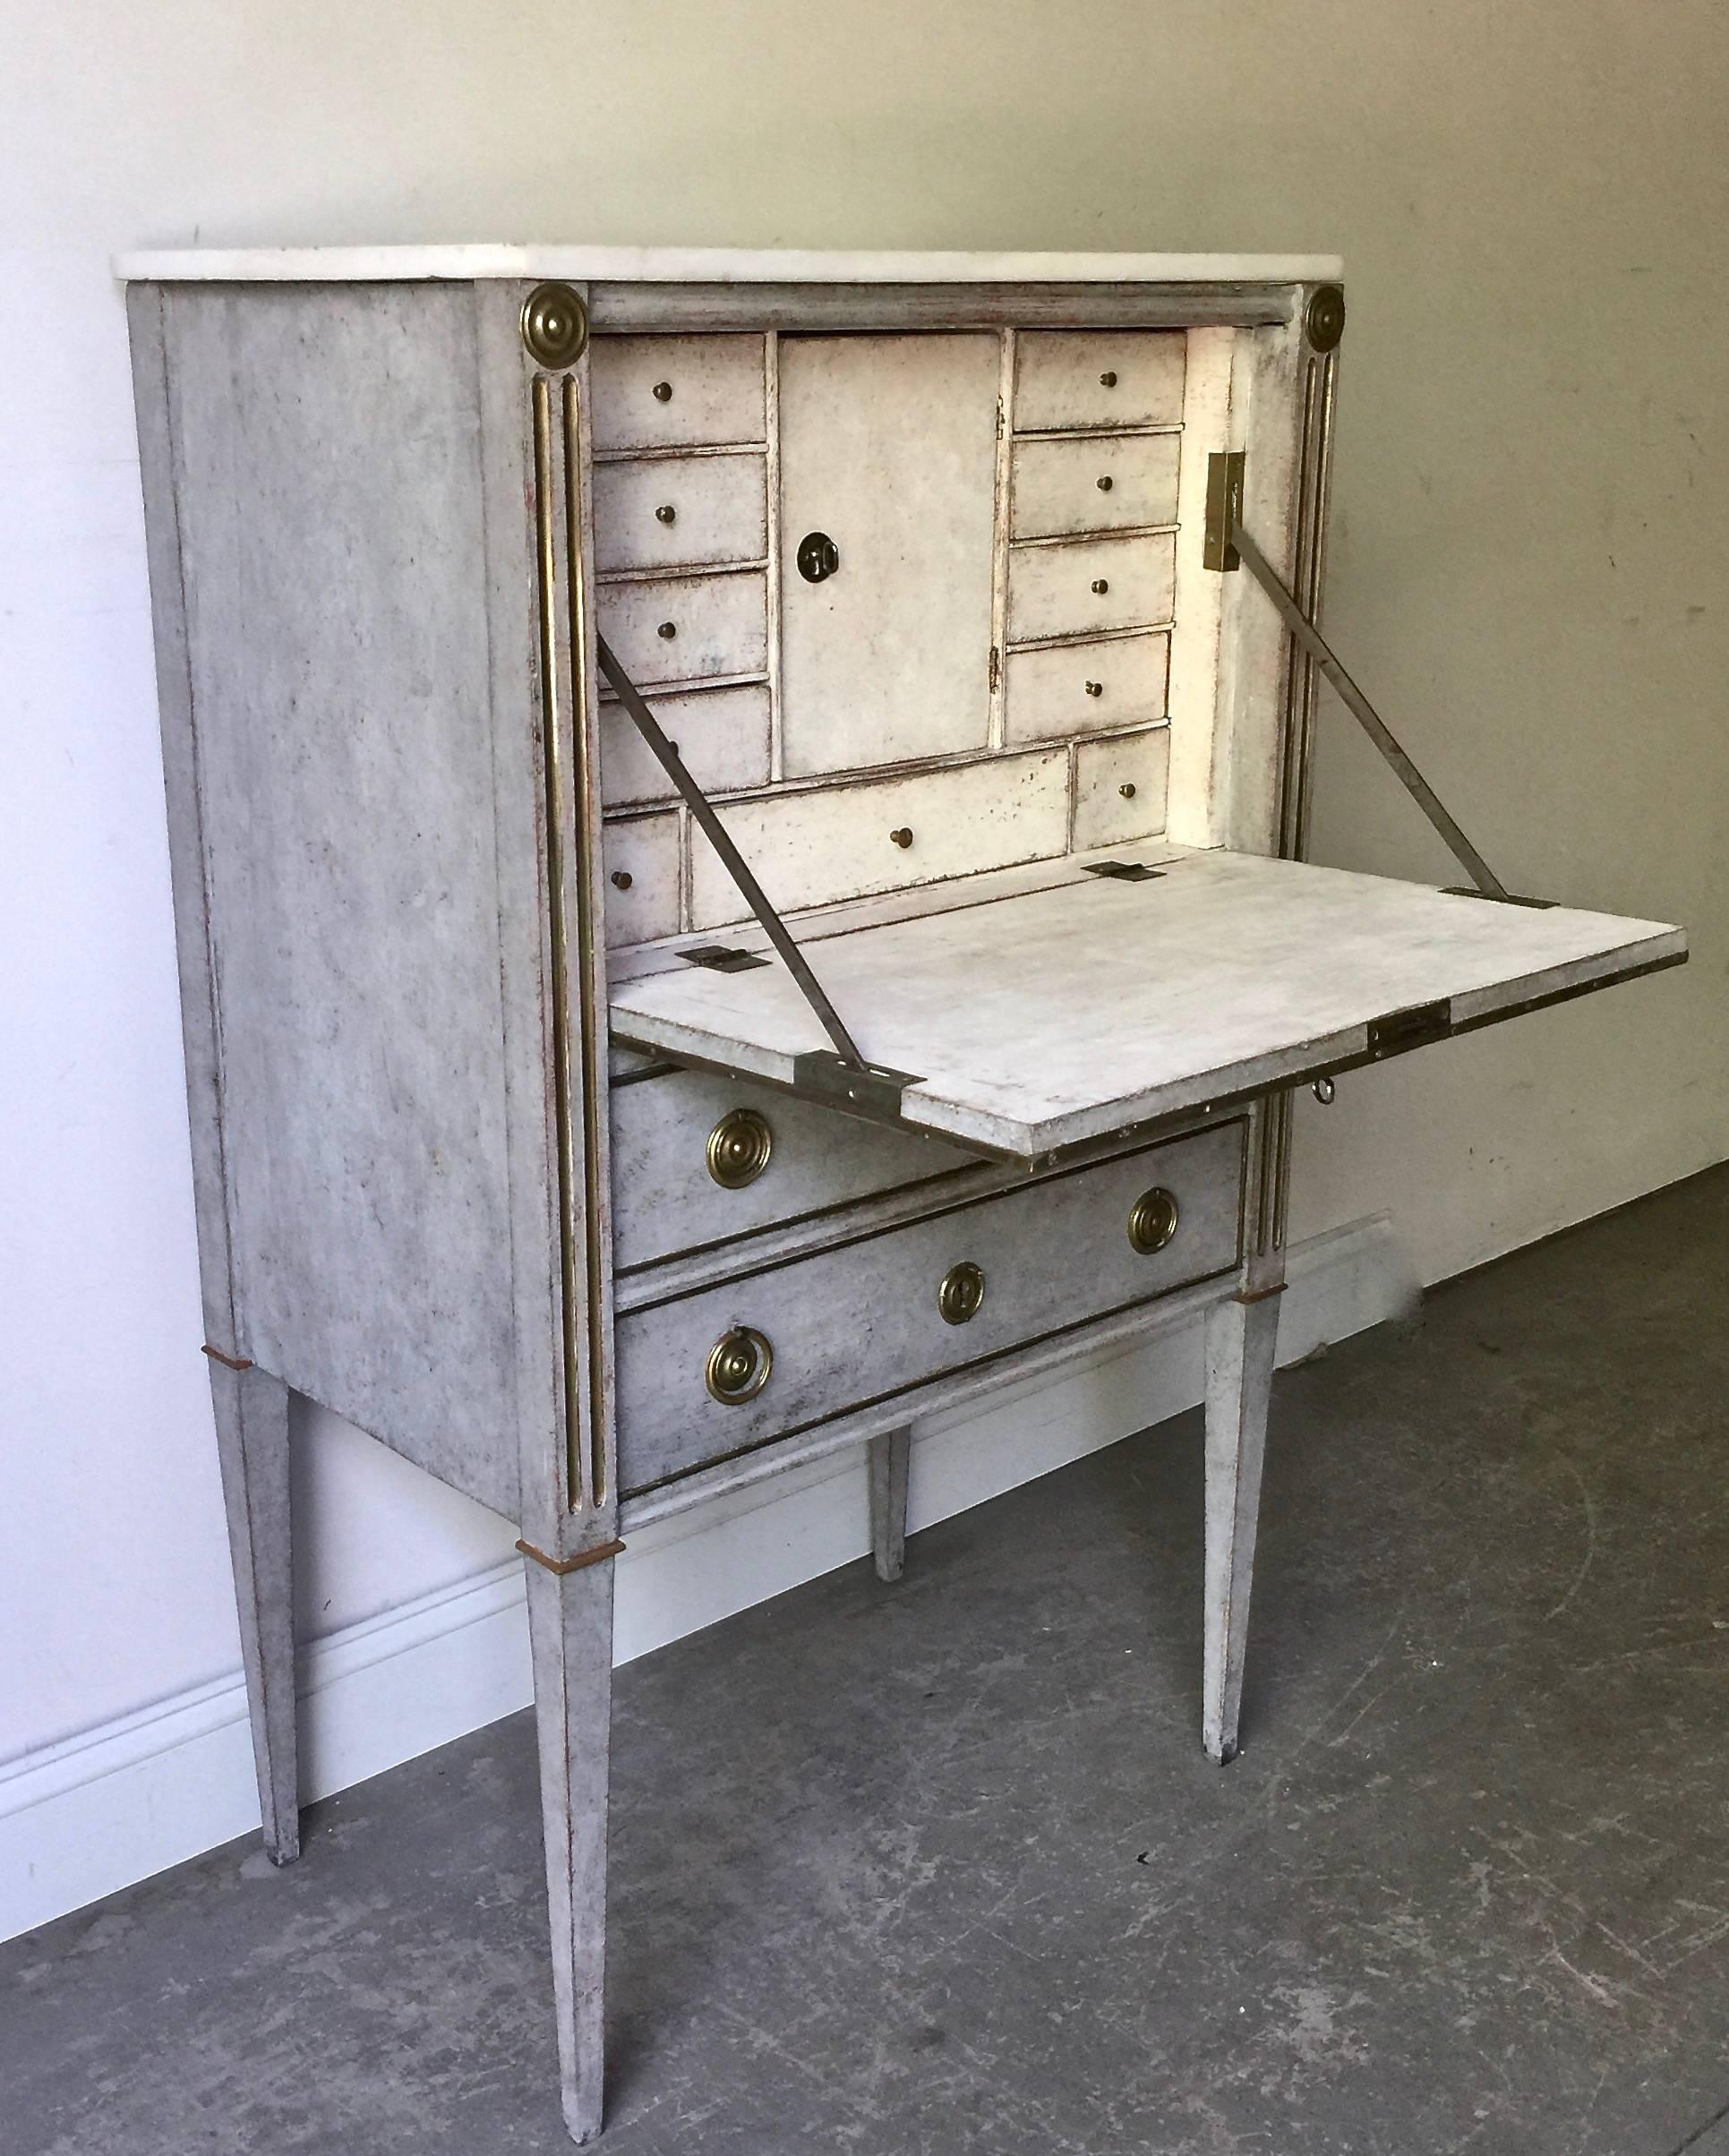 Charming small Swedish Gustavian ladies Bureau with marble top and drop-down desk surface with banks of small drawers and compartment on two standard drawers with long slender tapered legs. Very practical for any small places.
Sweden, circa